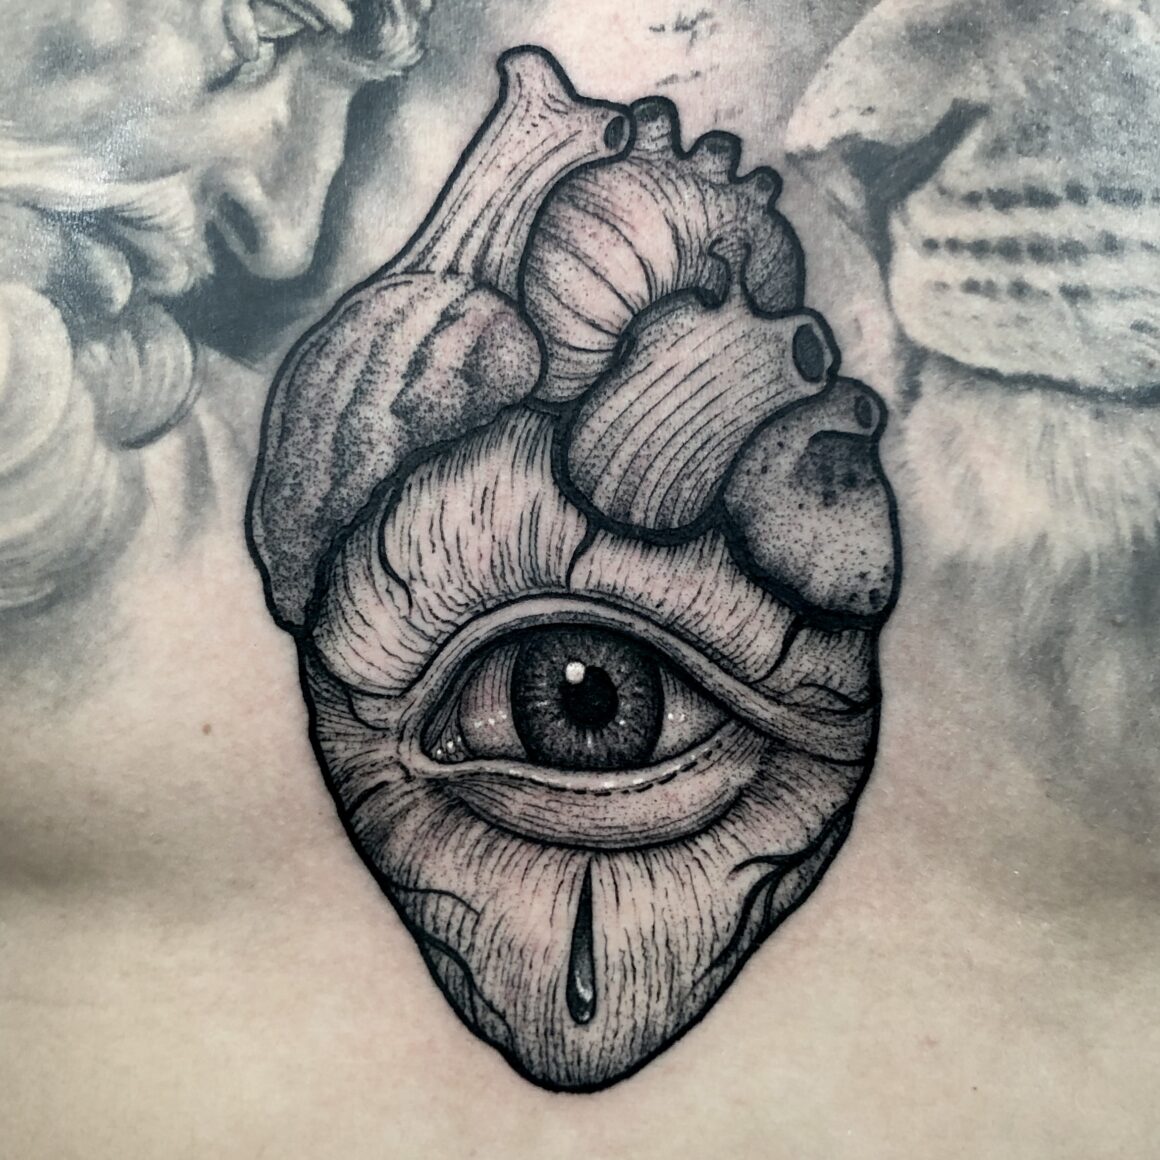 Tattoo by Luca Cospito, @lucky_luchino